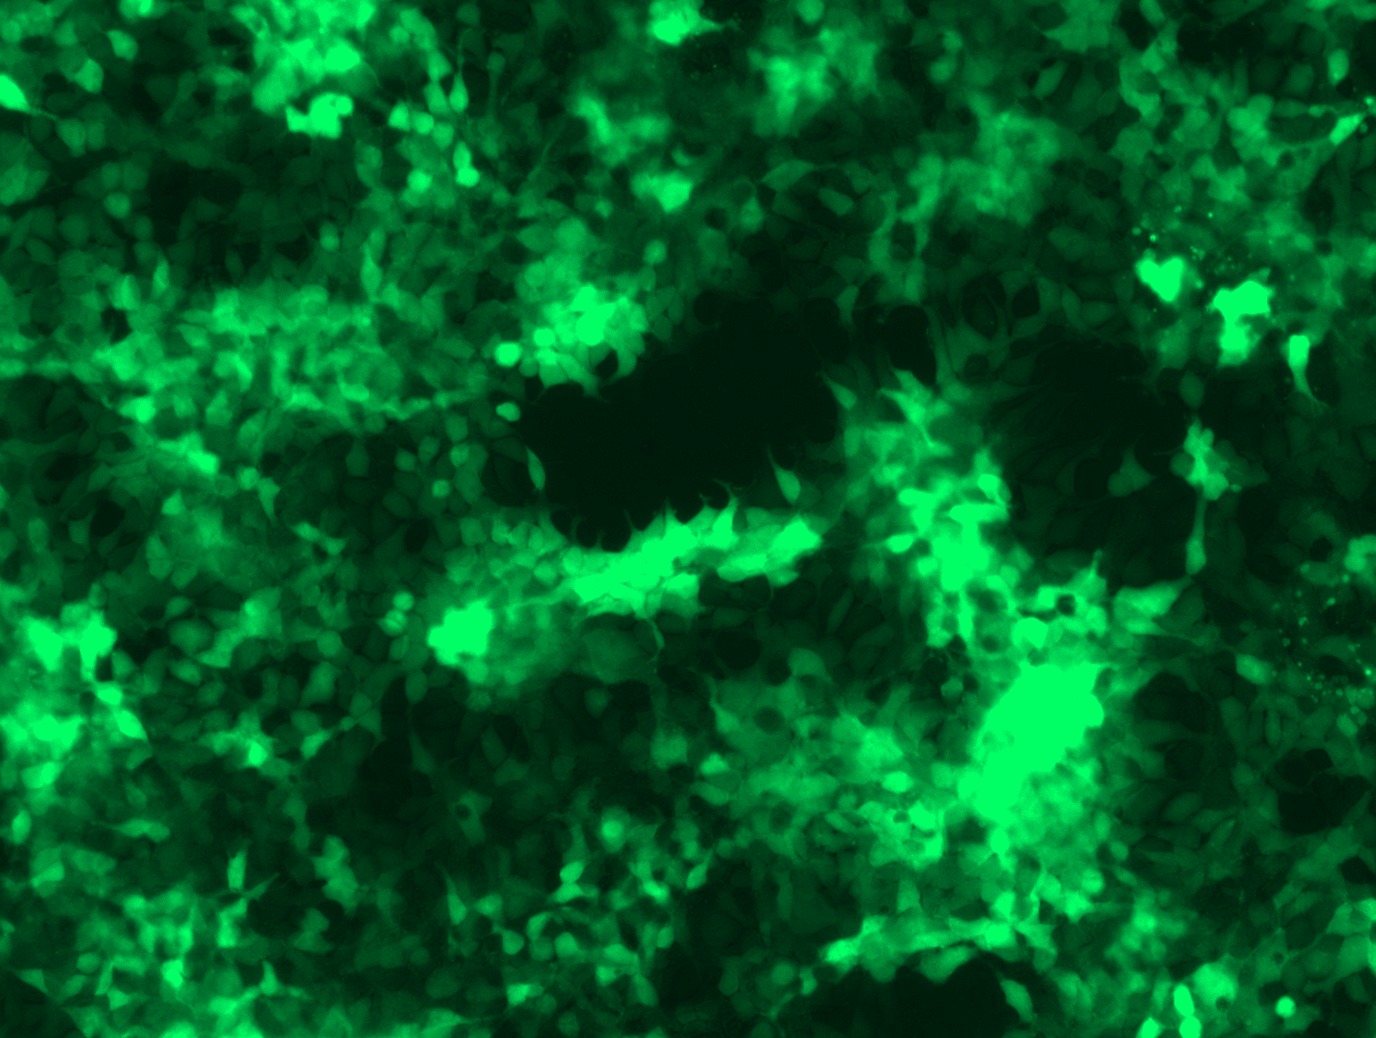 GFP signal was observed under microscope at 48 hours after transduction of TL303203A virus into HEK293 cells. TL303203A virus was prepared using lenti-shRNA TL303203A and TR30037 packaging kit.